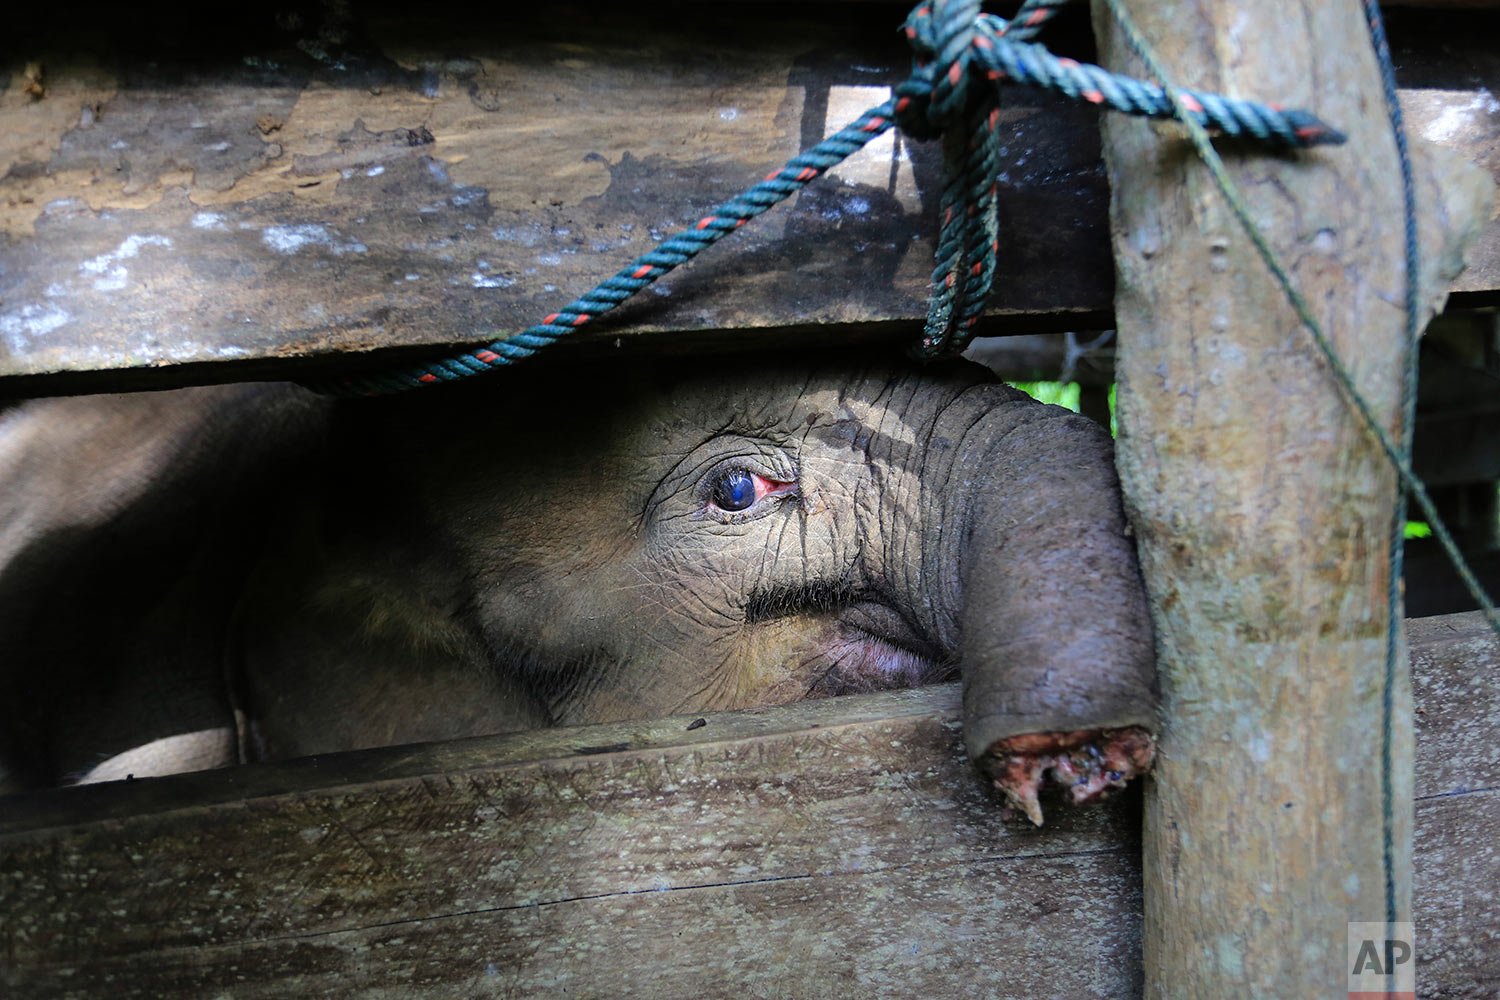  A Sumatran elephant calf that lost half of its trunk, after being caught in what authorities alleged was a trap set by poachers who prey on the endangered species, is treated at an elephant conservation center in Saree, Aceh Besar, Indonesia, Monday